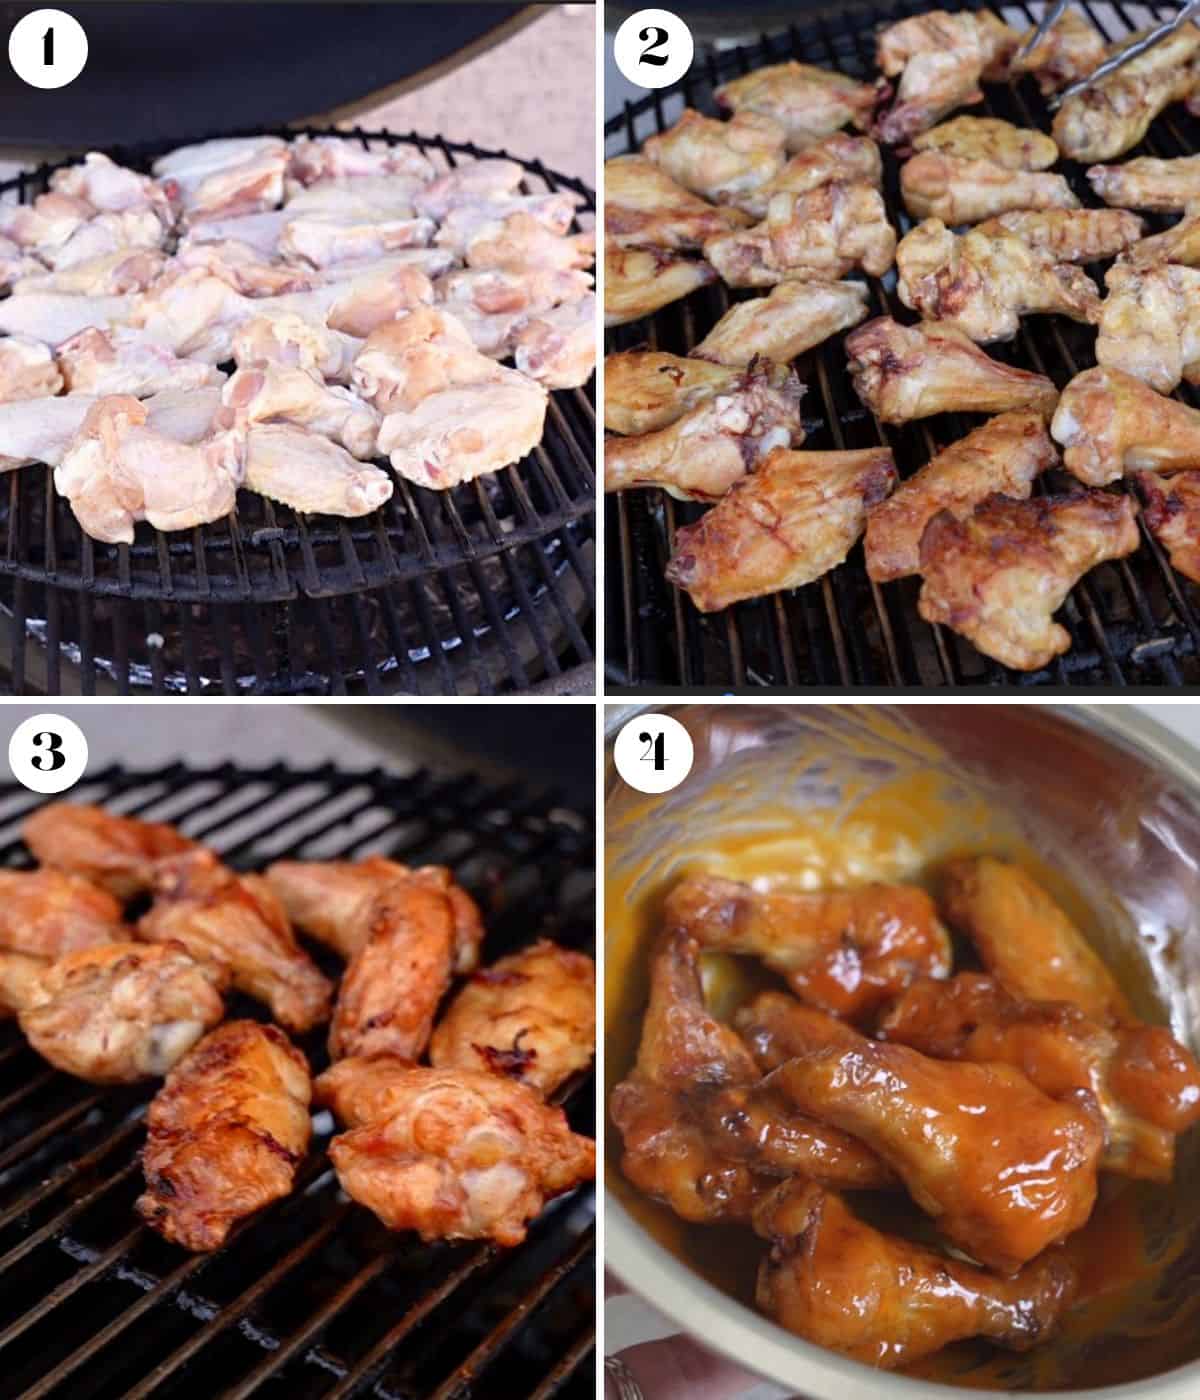 Collage of 4 images of wings on the grill.